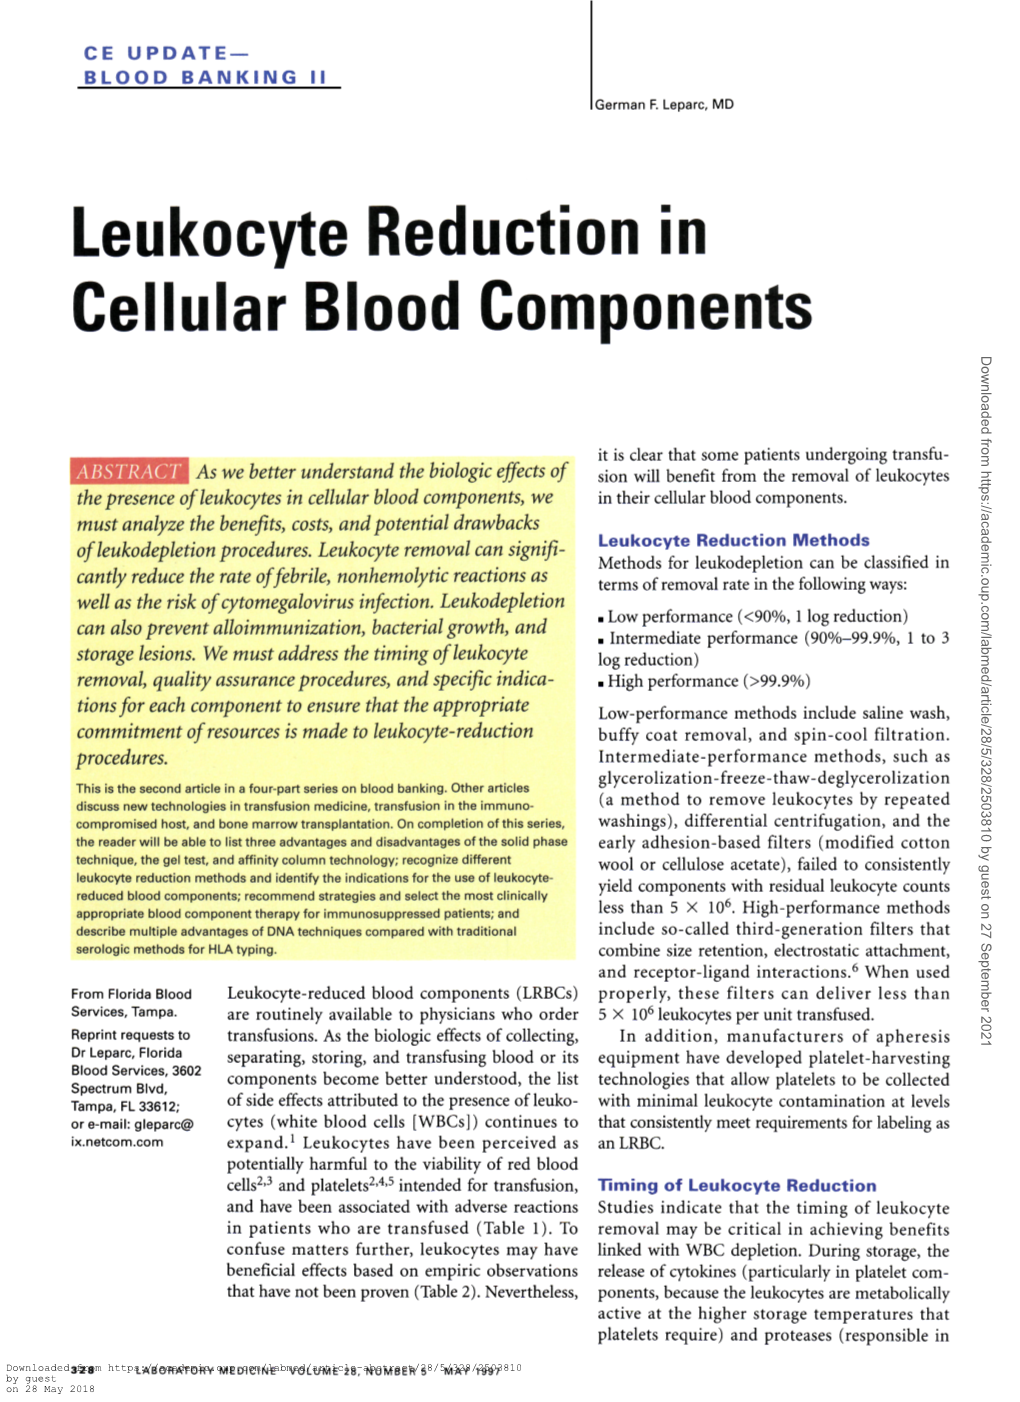 Leukocyte Reduction in Cellular Blood Components Downloaded from by Guest on 27 September 2021